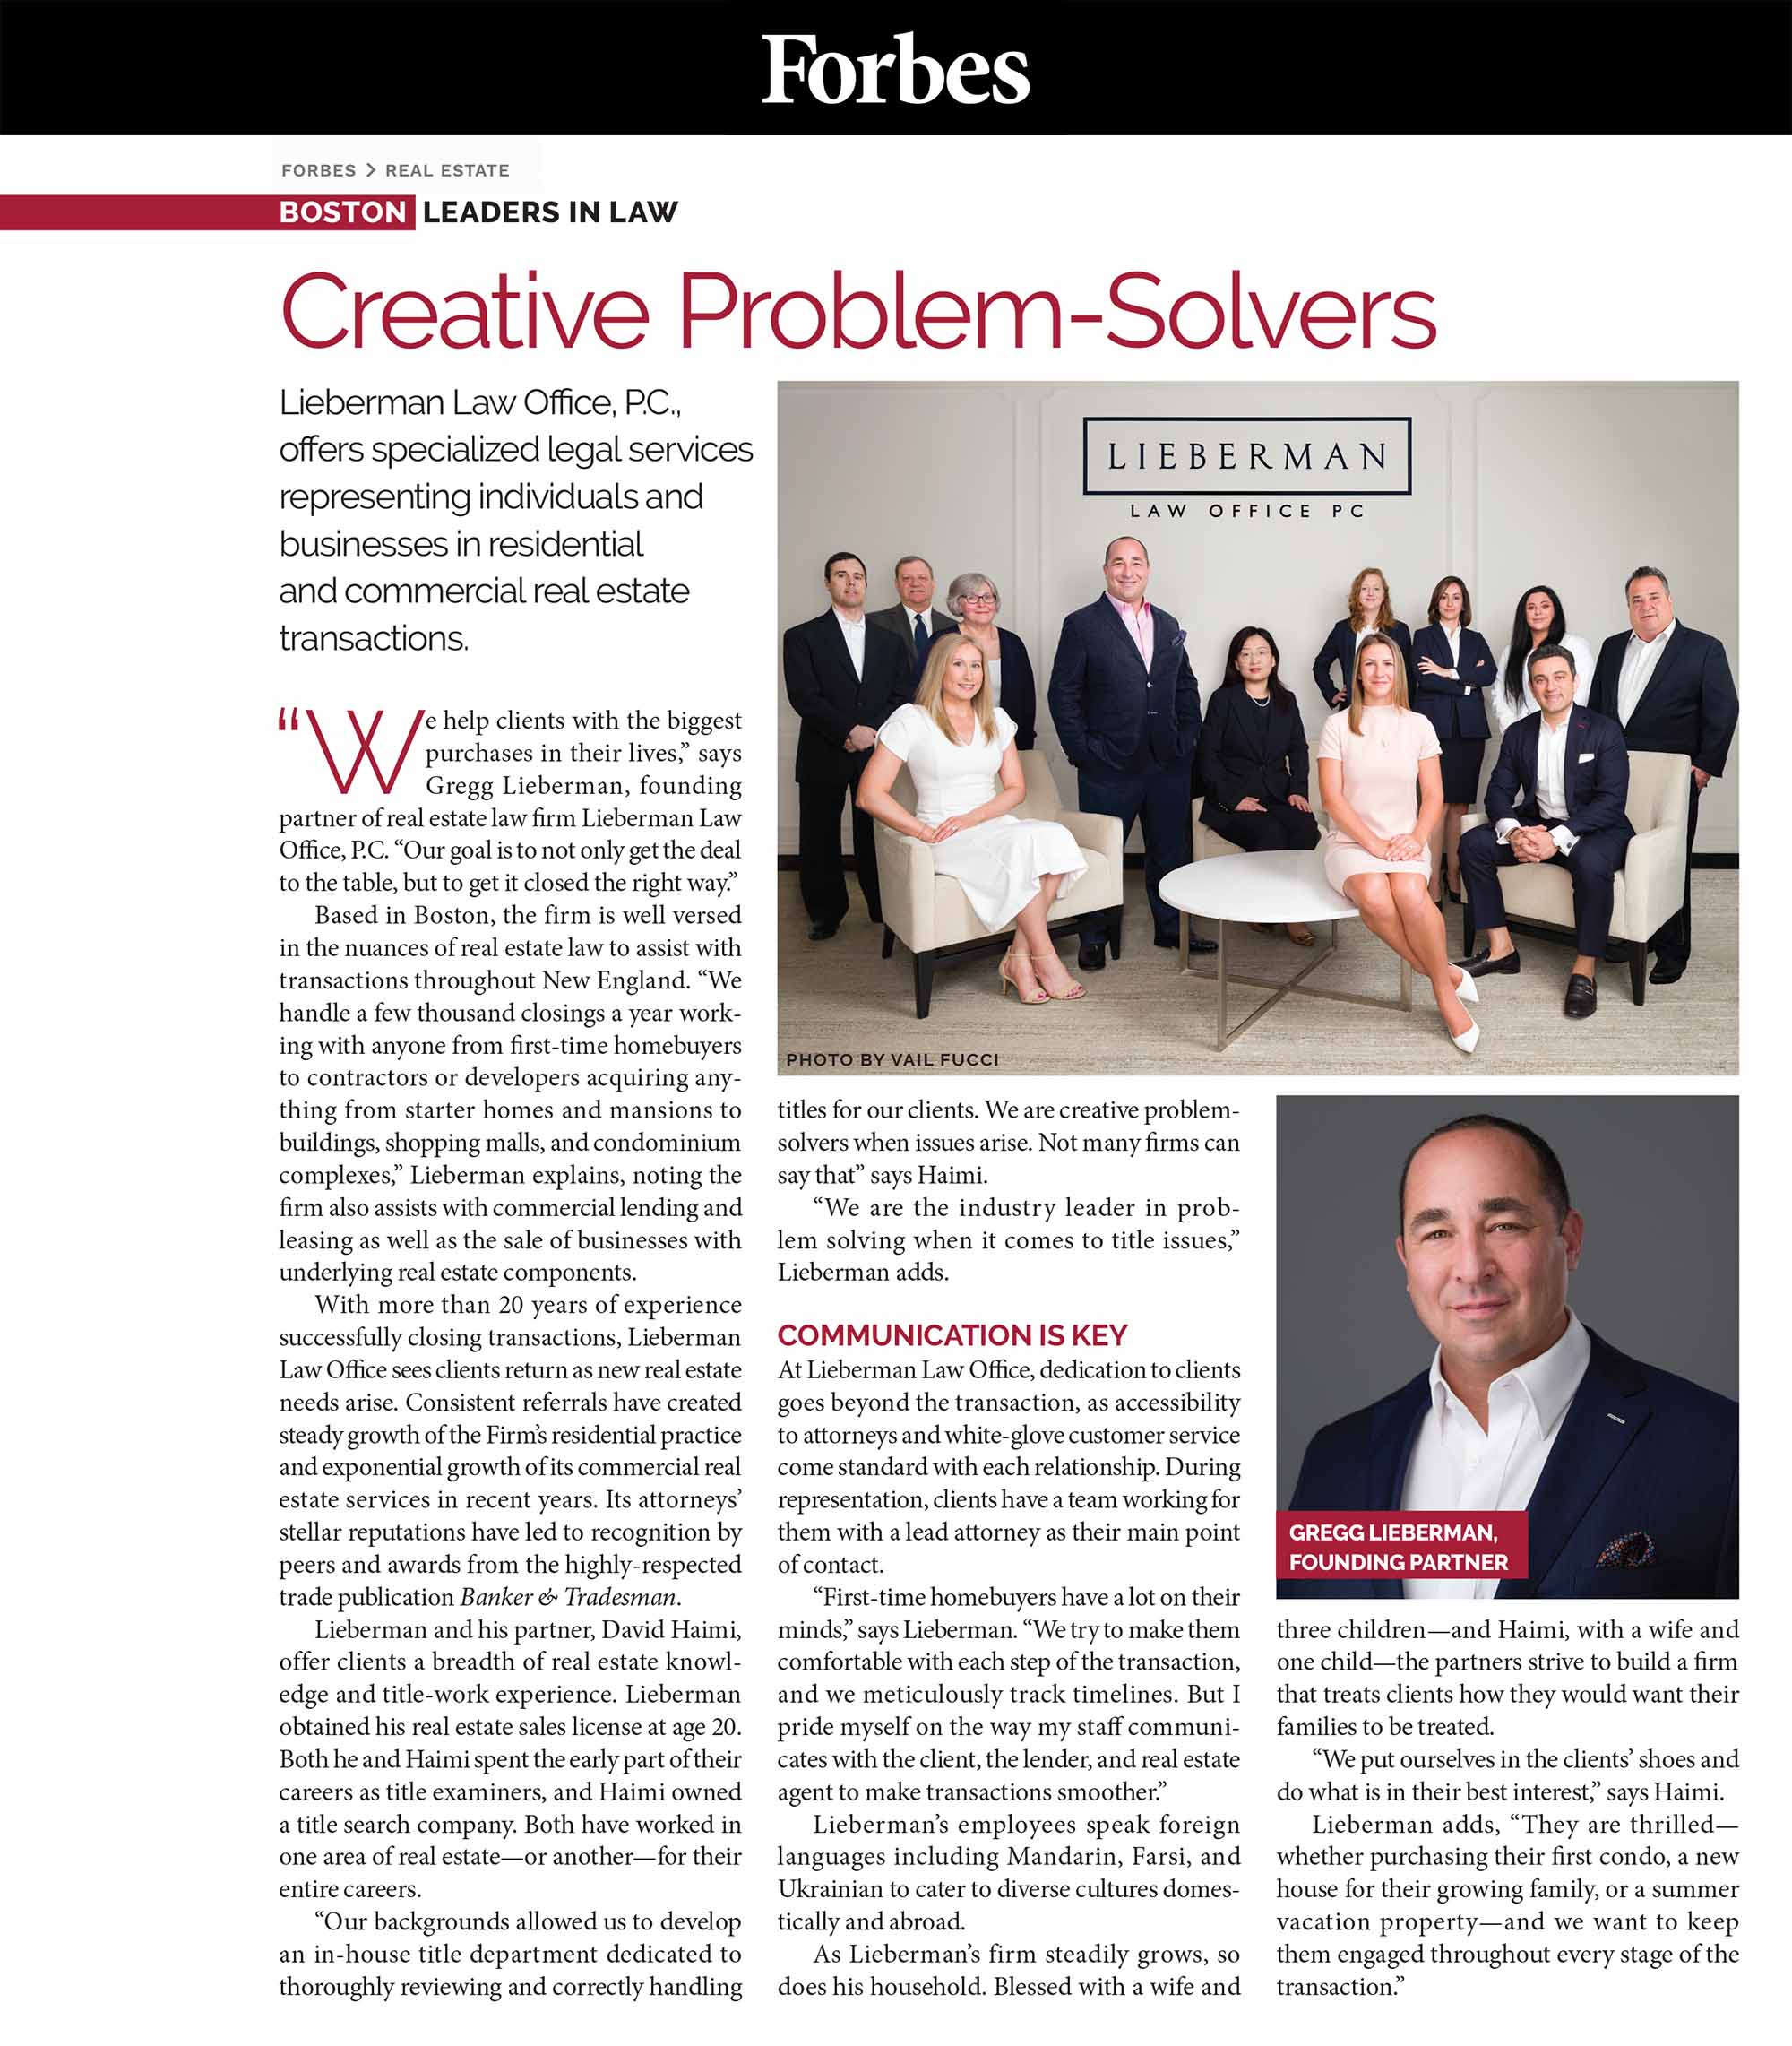 Forbes Boston Leaders In Law Lieberman Law Office Creative Problem Solvers 